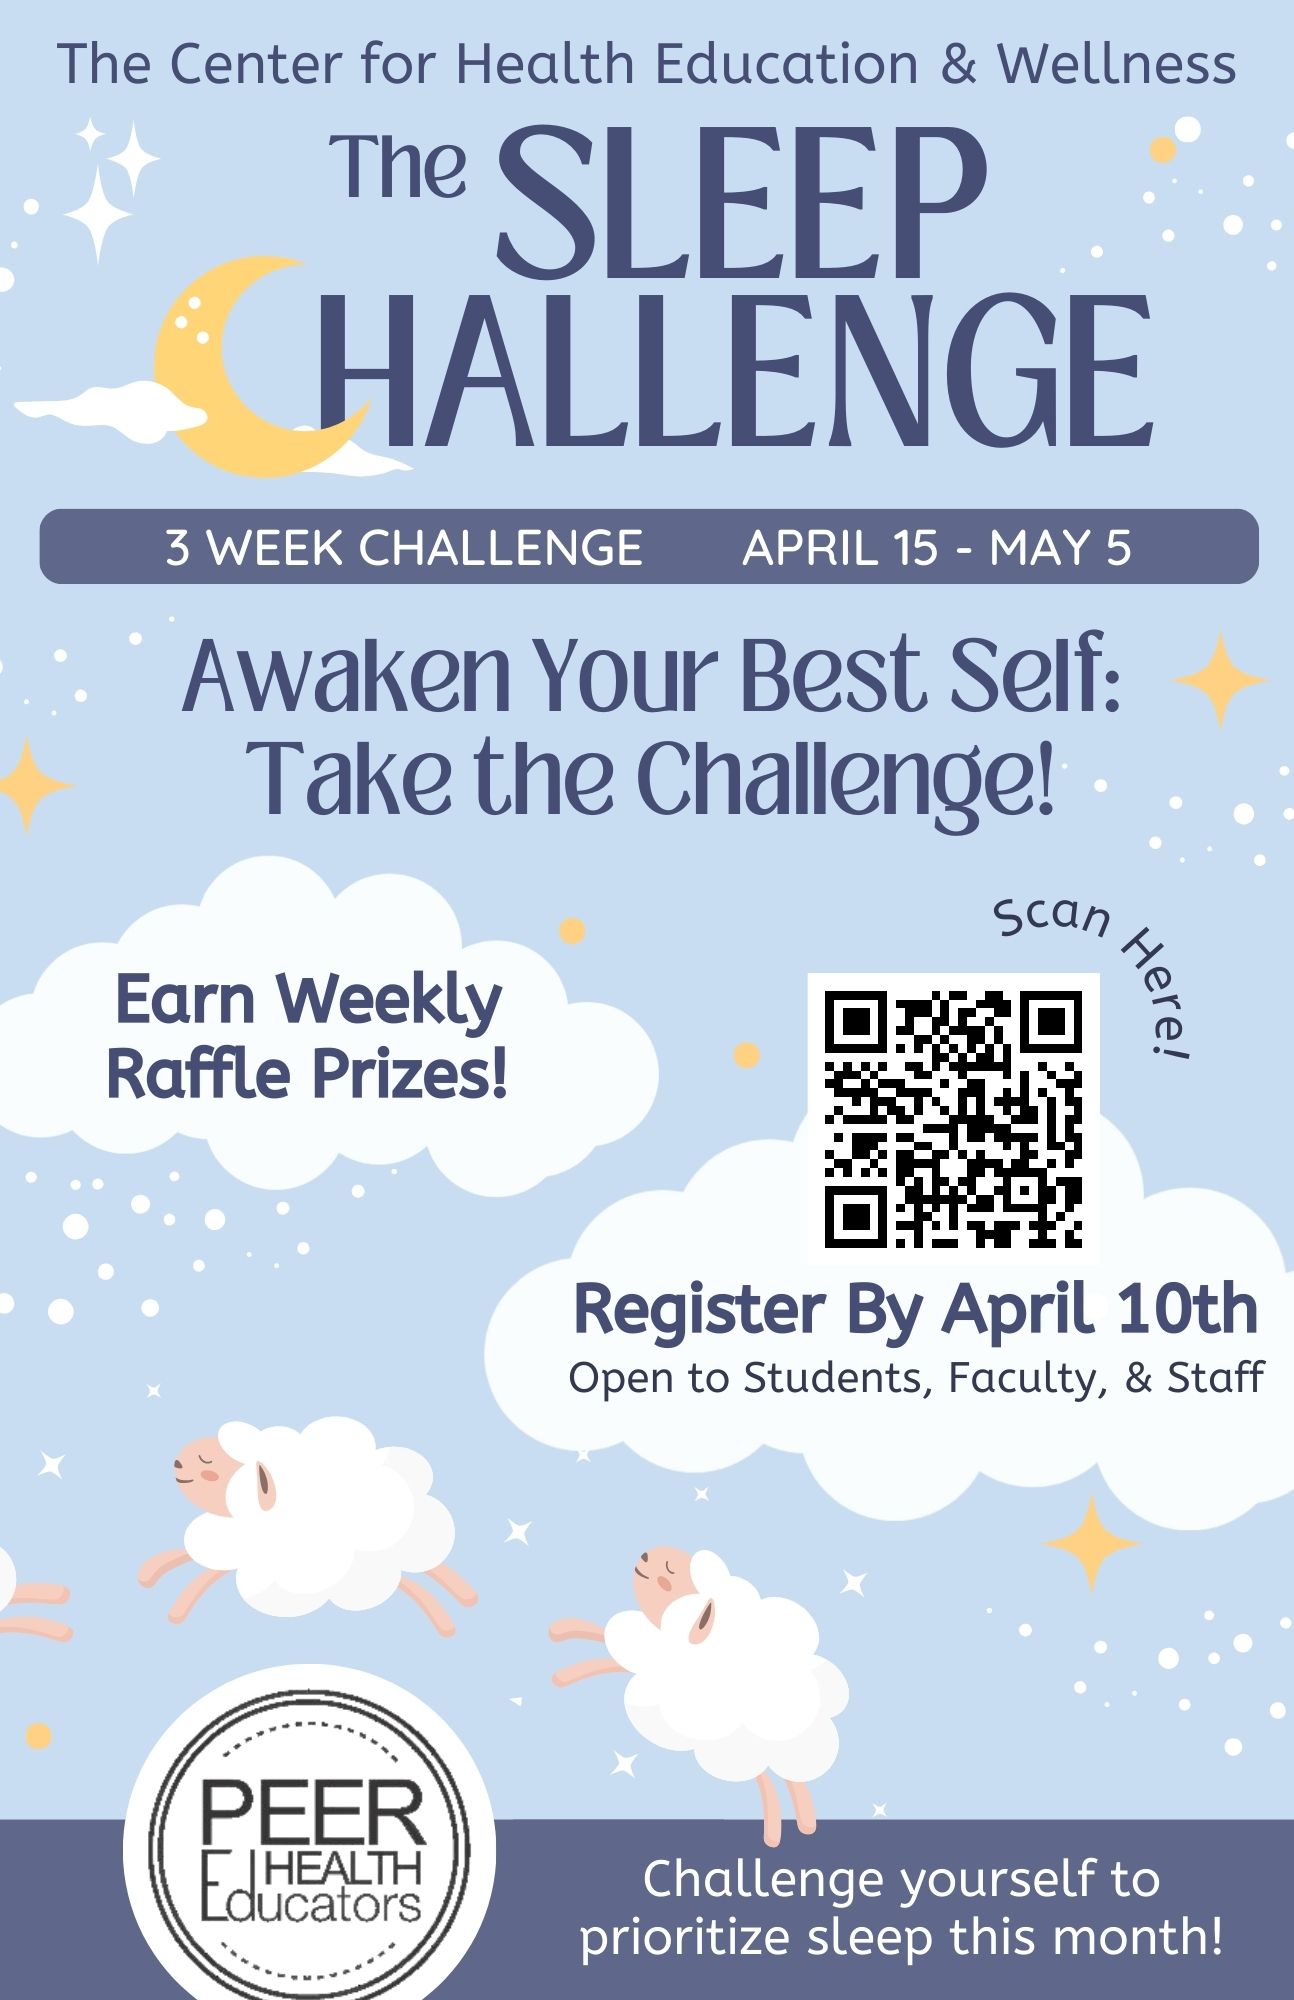 Poster with clouds and sheet offering the sleep challenge. It states to register by April 10th. You can earn prizes. There is also a QR code to register